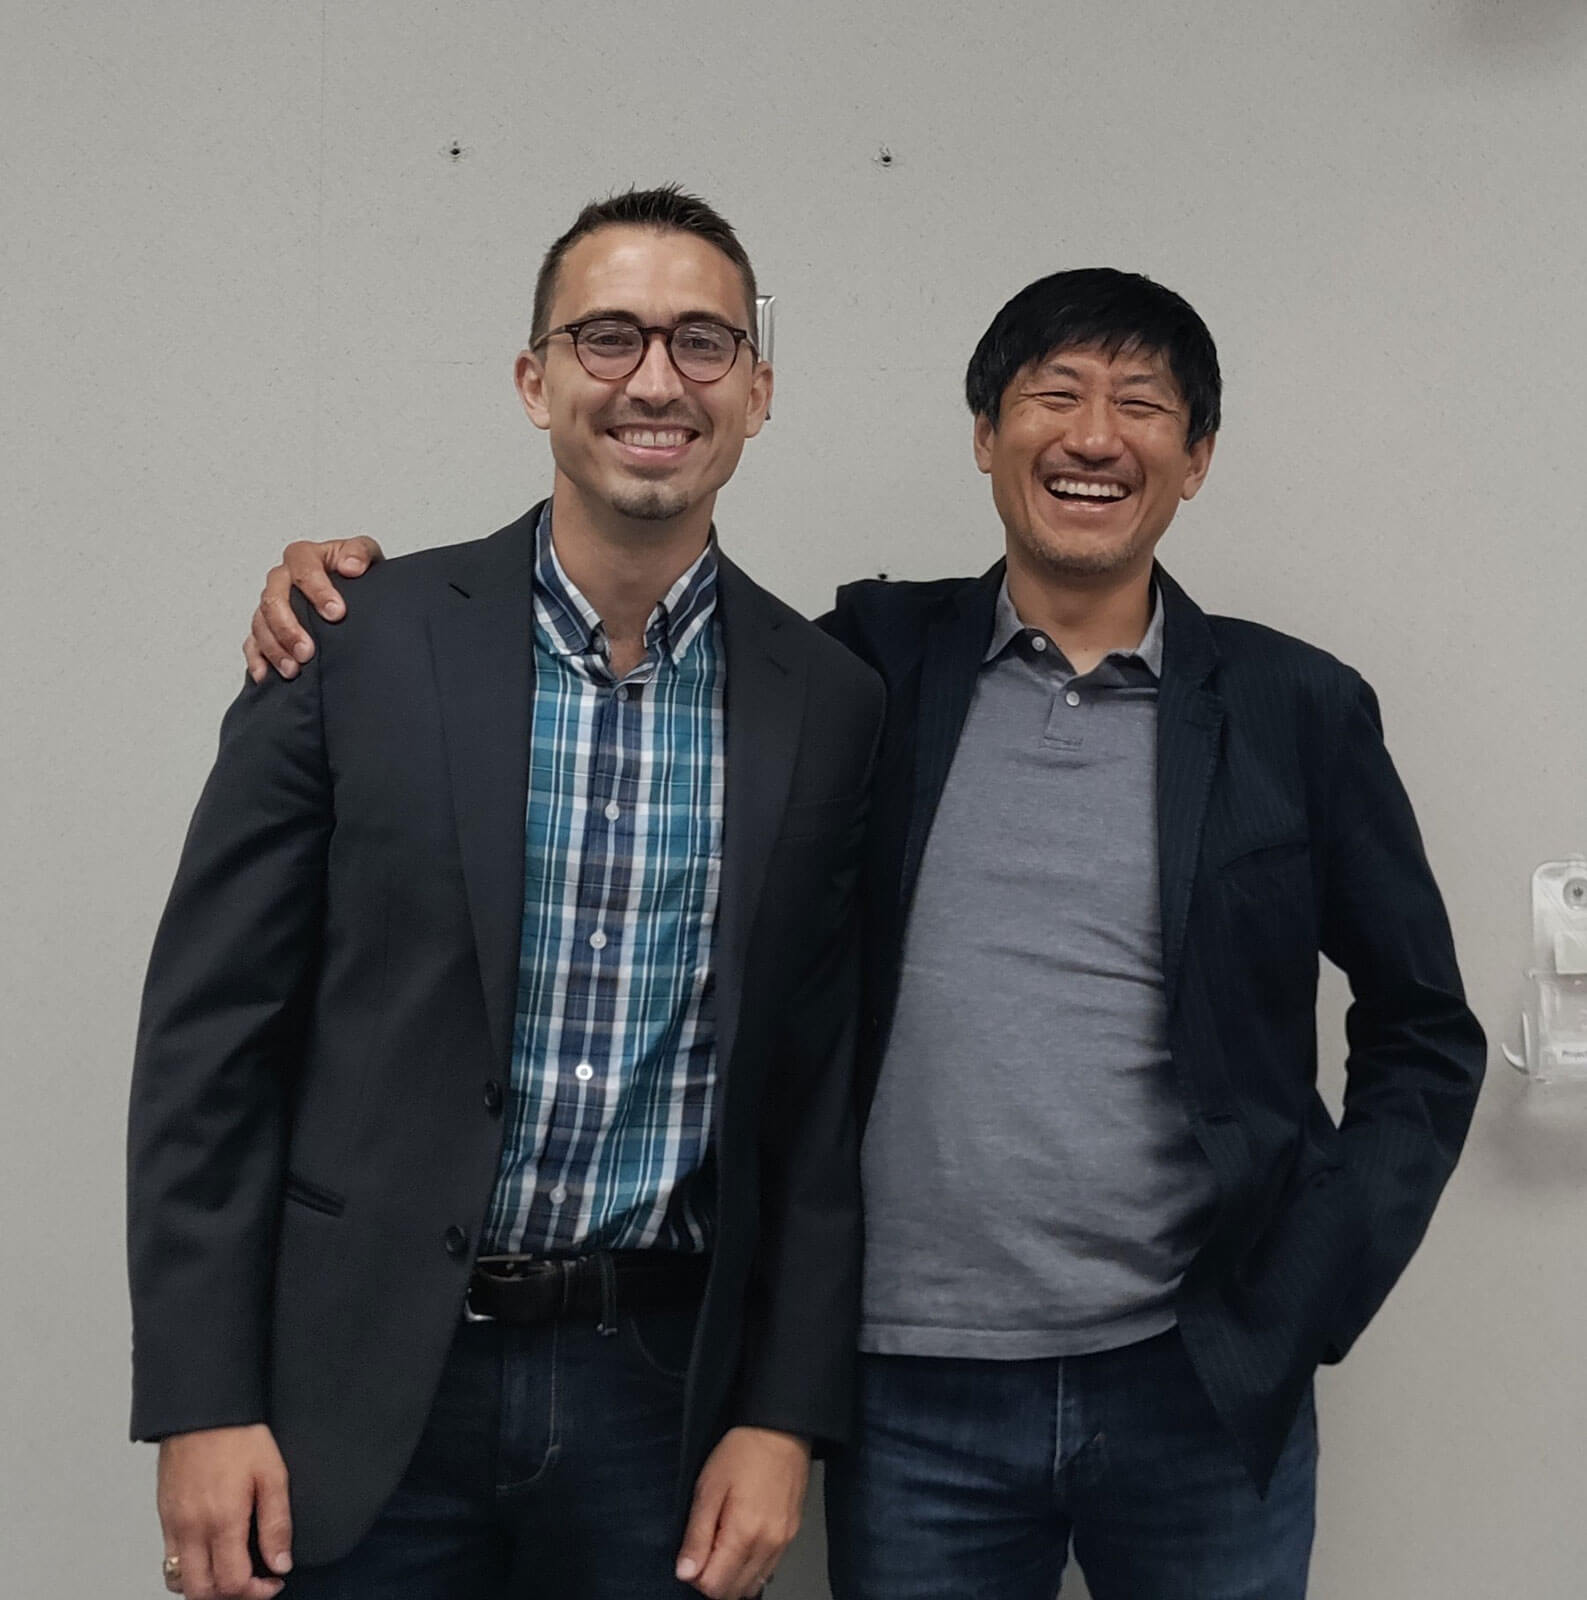 Dr. Nathan Abshire of Dr. Toshihiro Obata's Lab successfully defended his PhD!